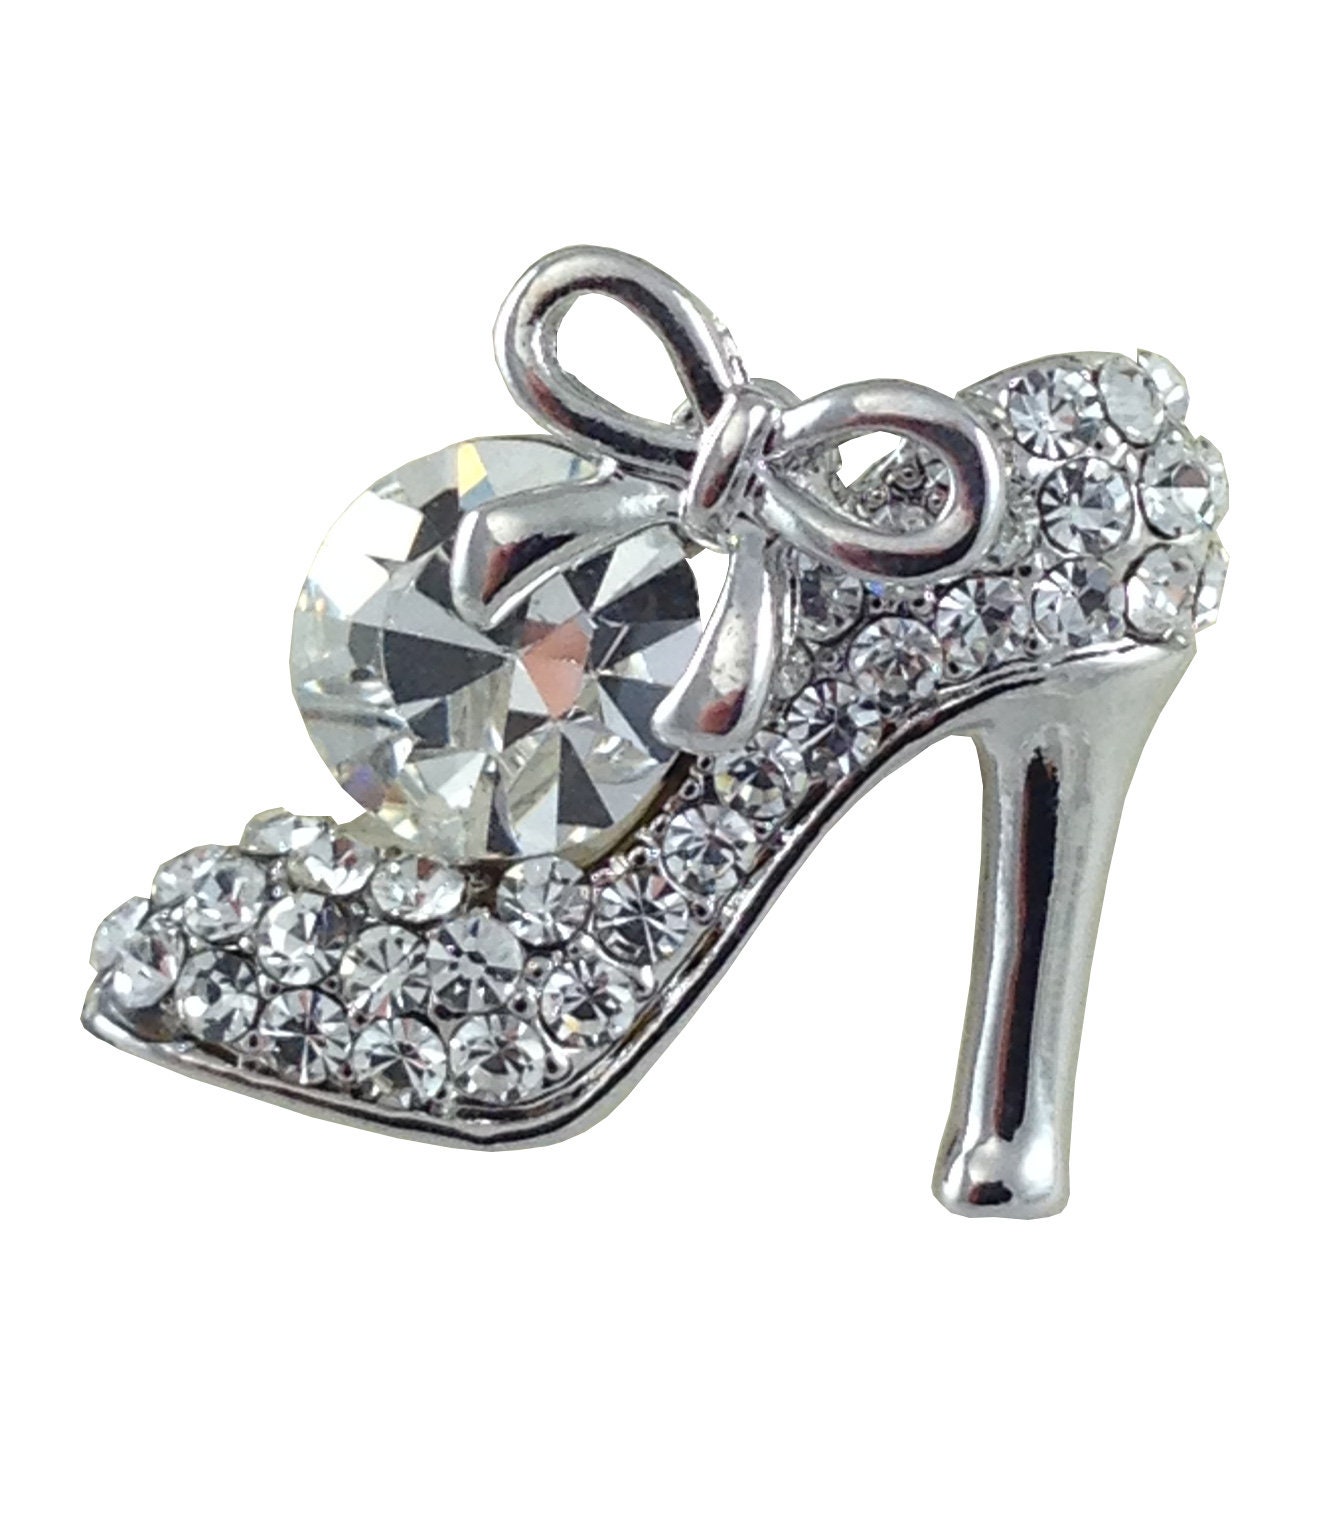 Reizteko Crystal High Heels Shoes Brooch Pins Jewelry Gift for Women Men Silver-Toned White 